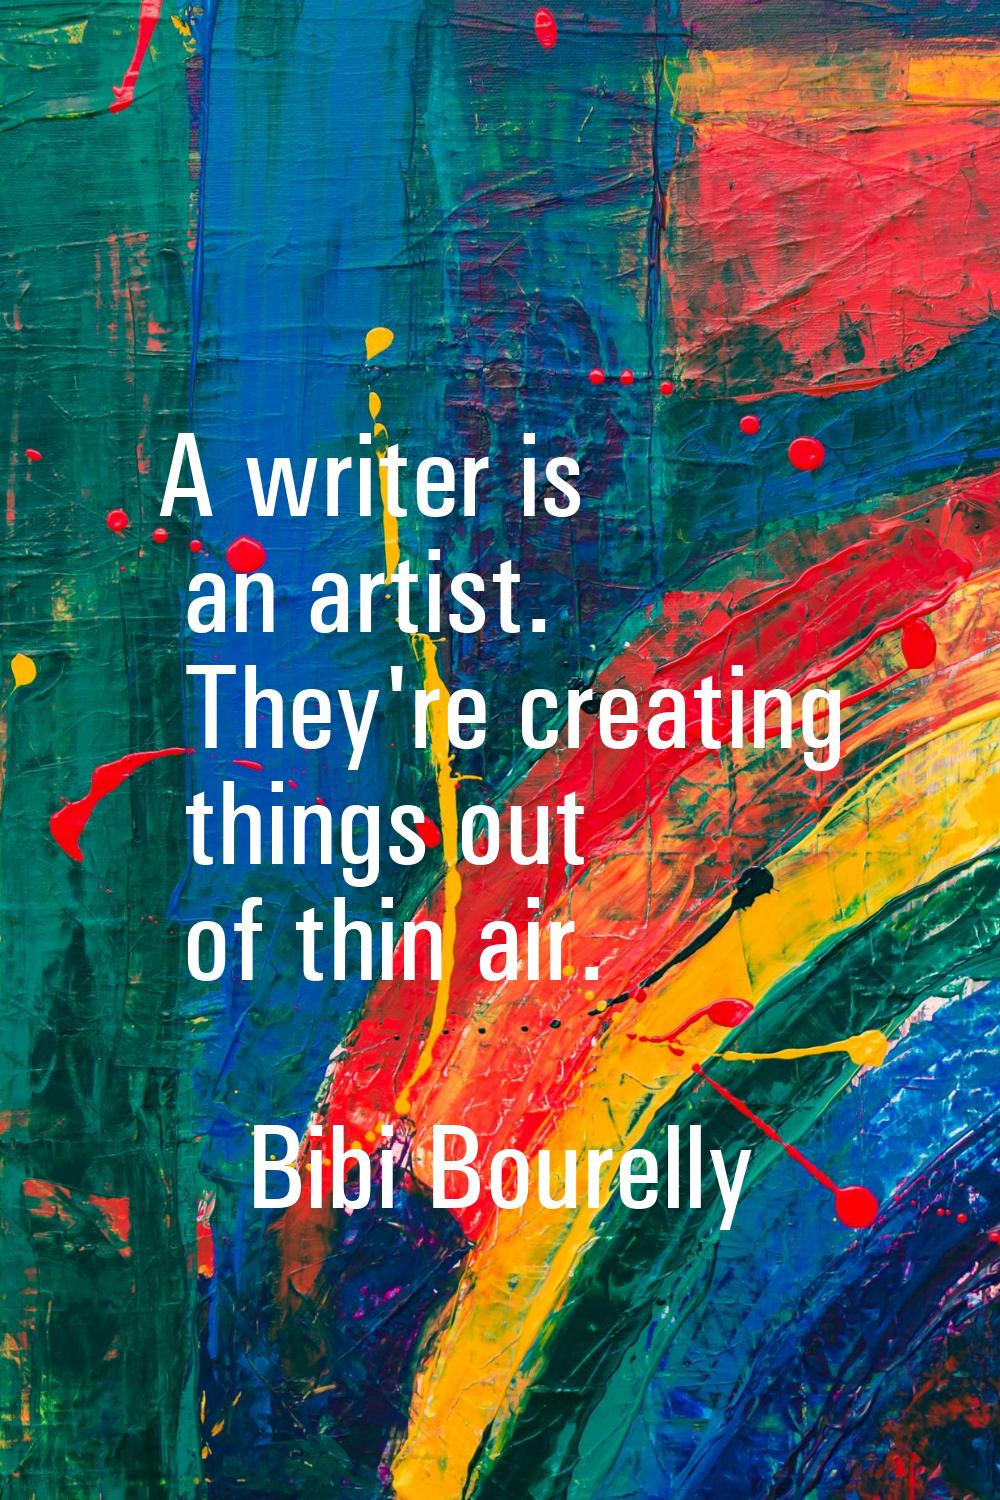 A writer is an artist. They're creating things out of thin air.